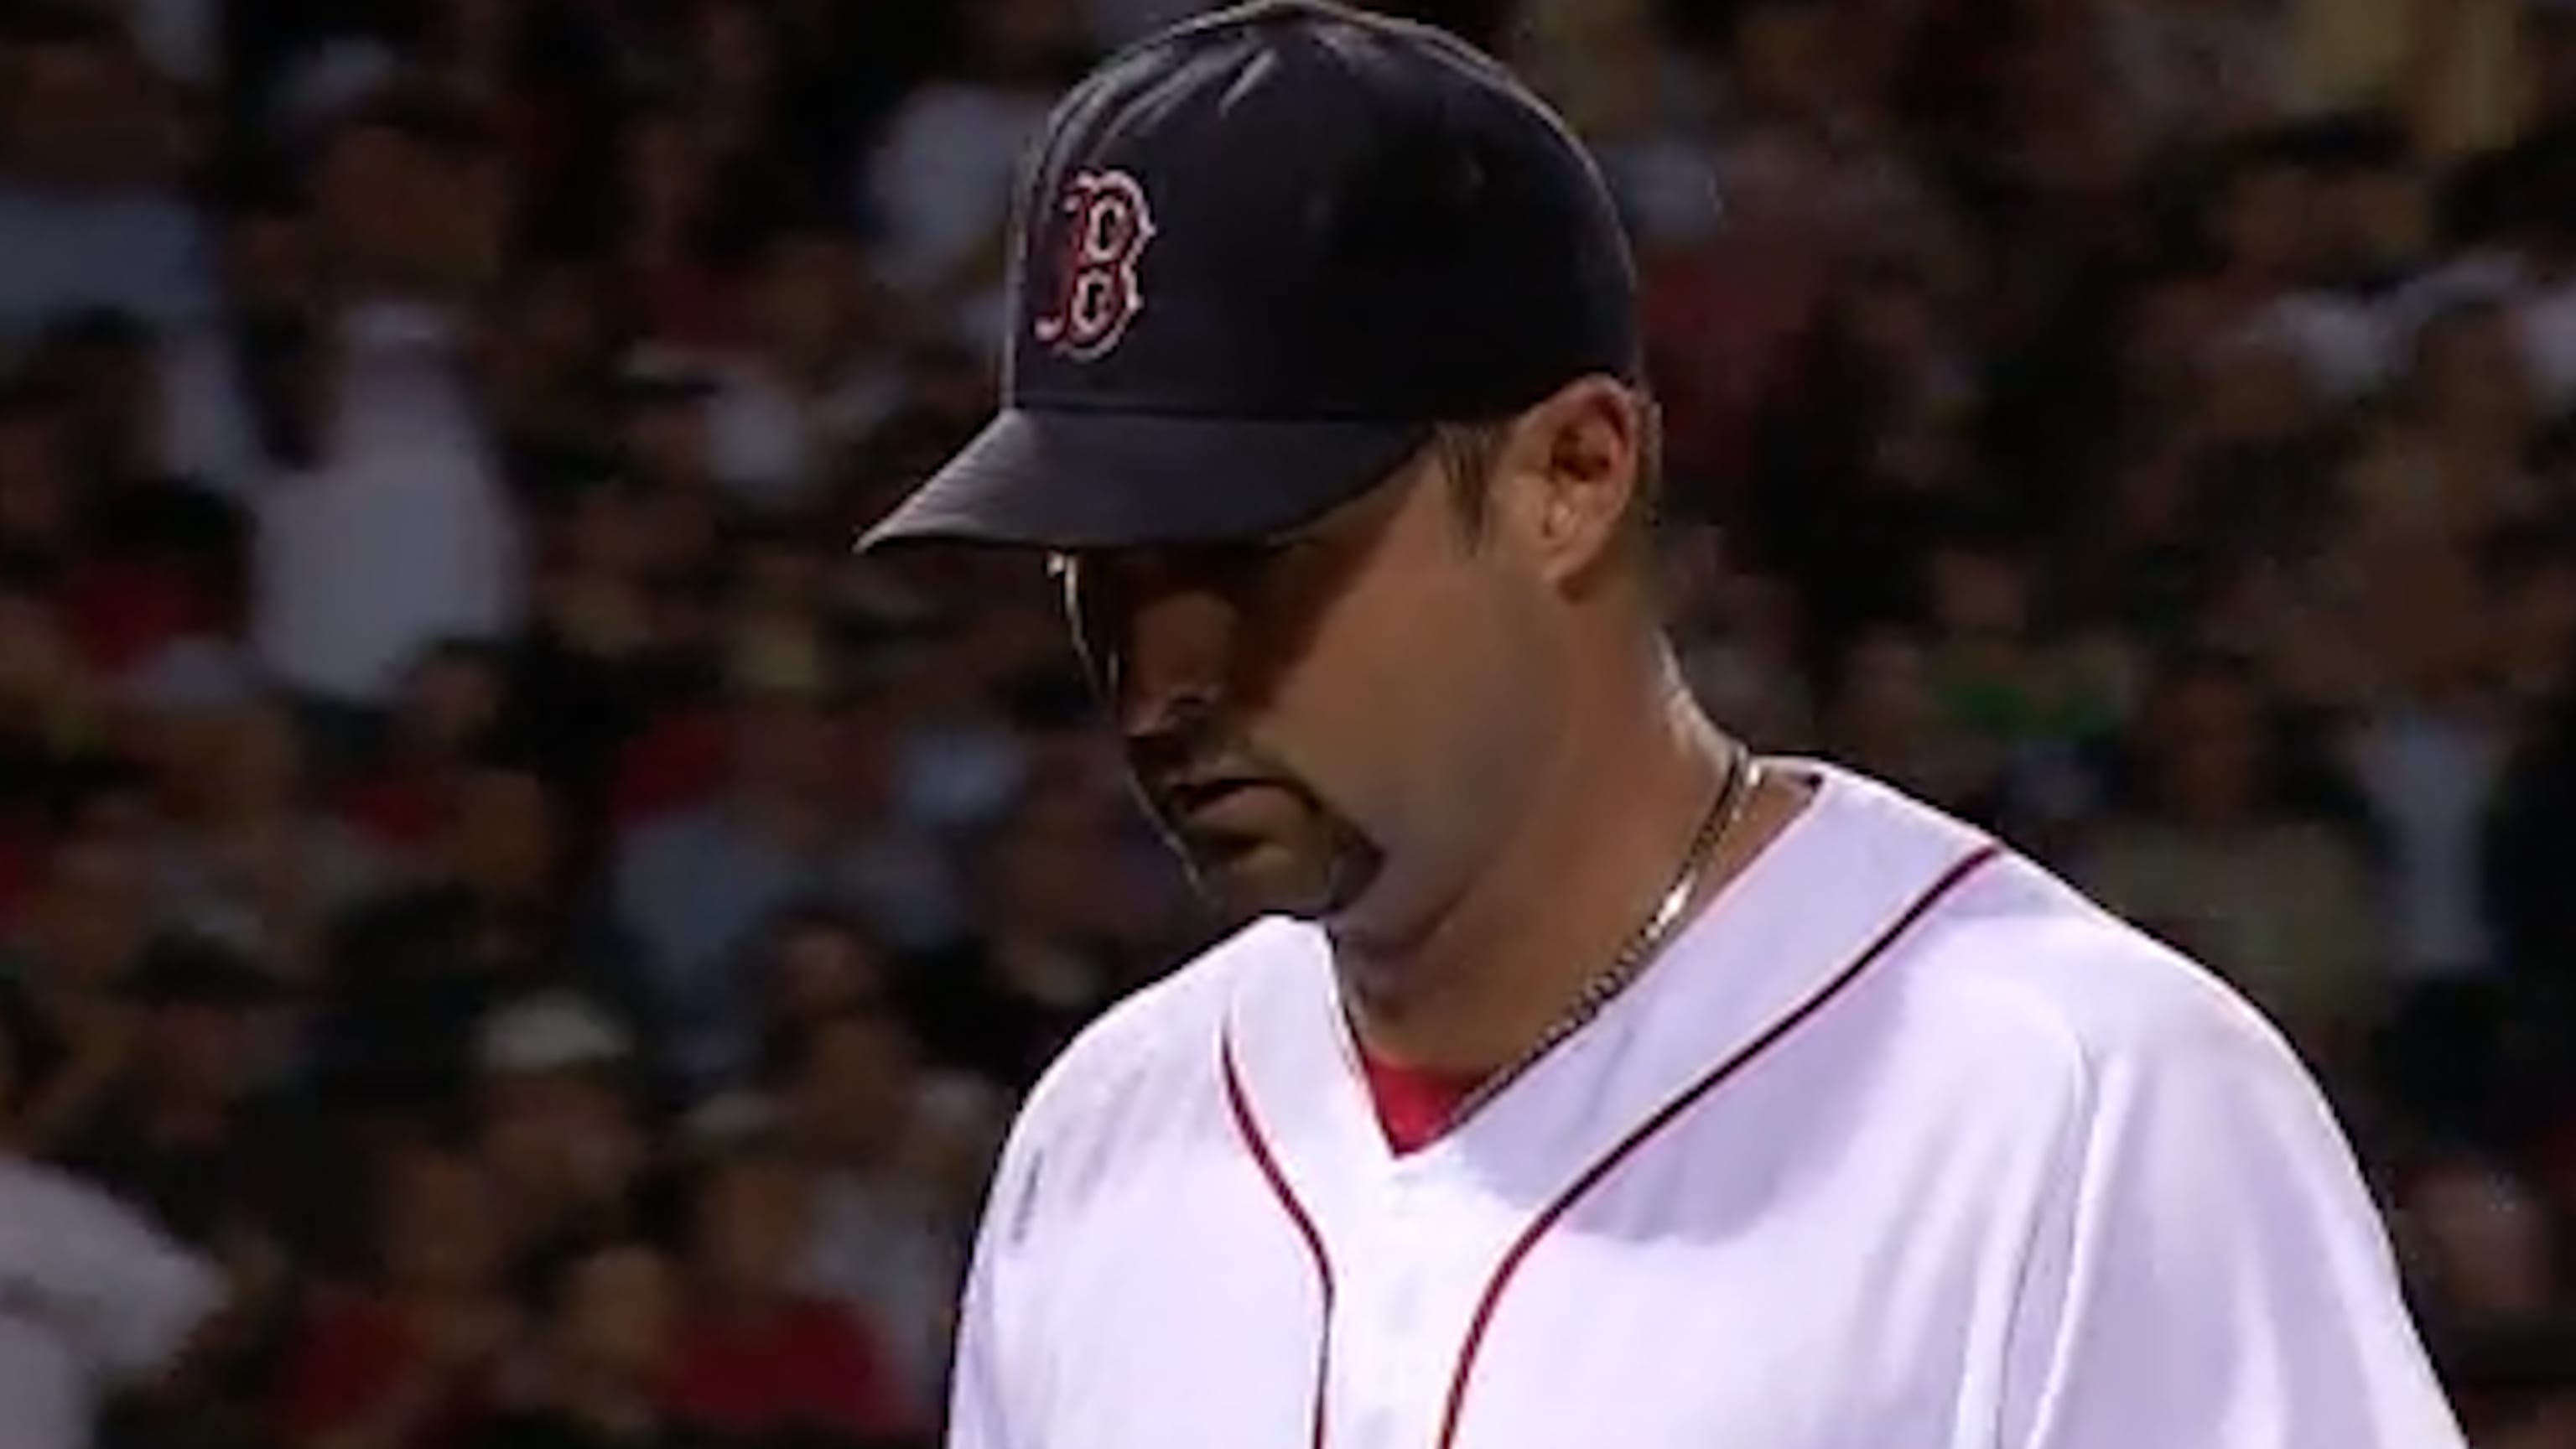 Beloved Red Sox pitcher Tim Wakefield dies at age 57 after undisclosed  health issue